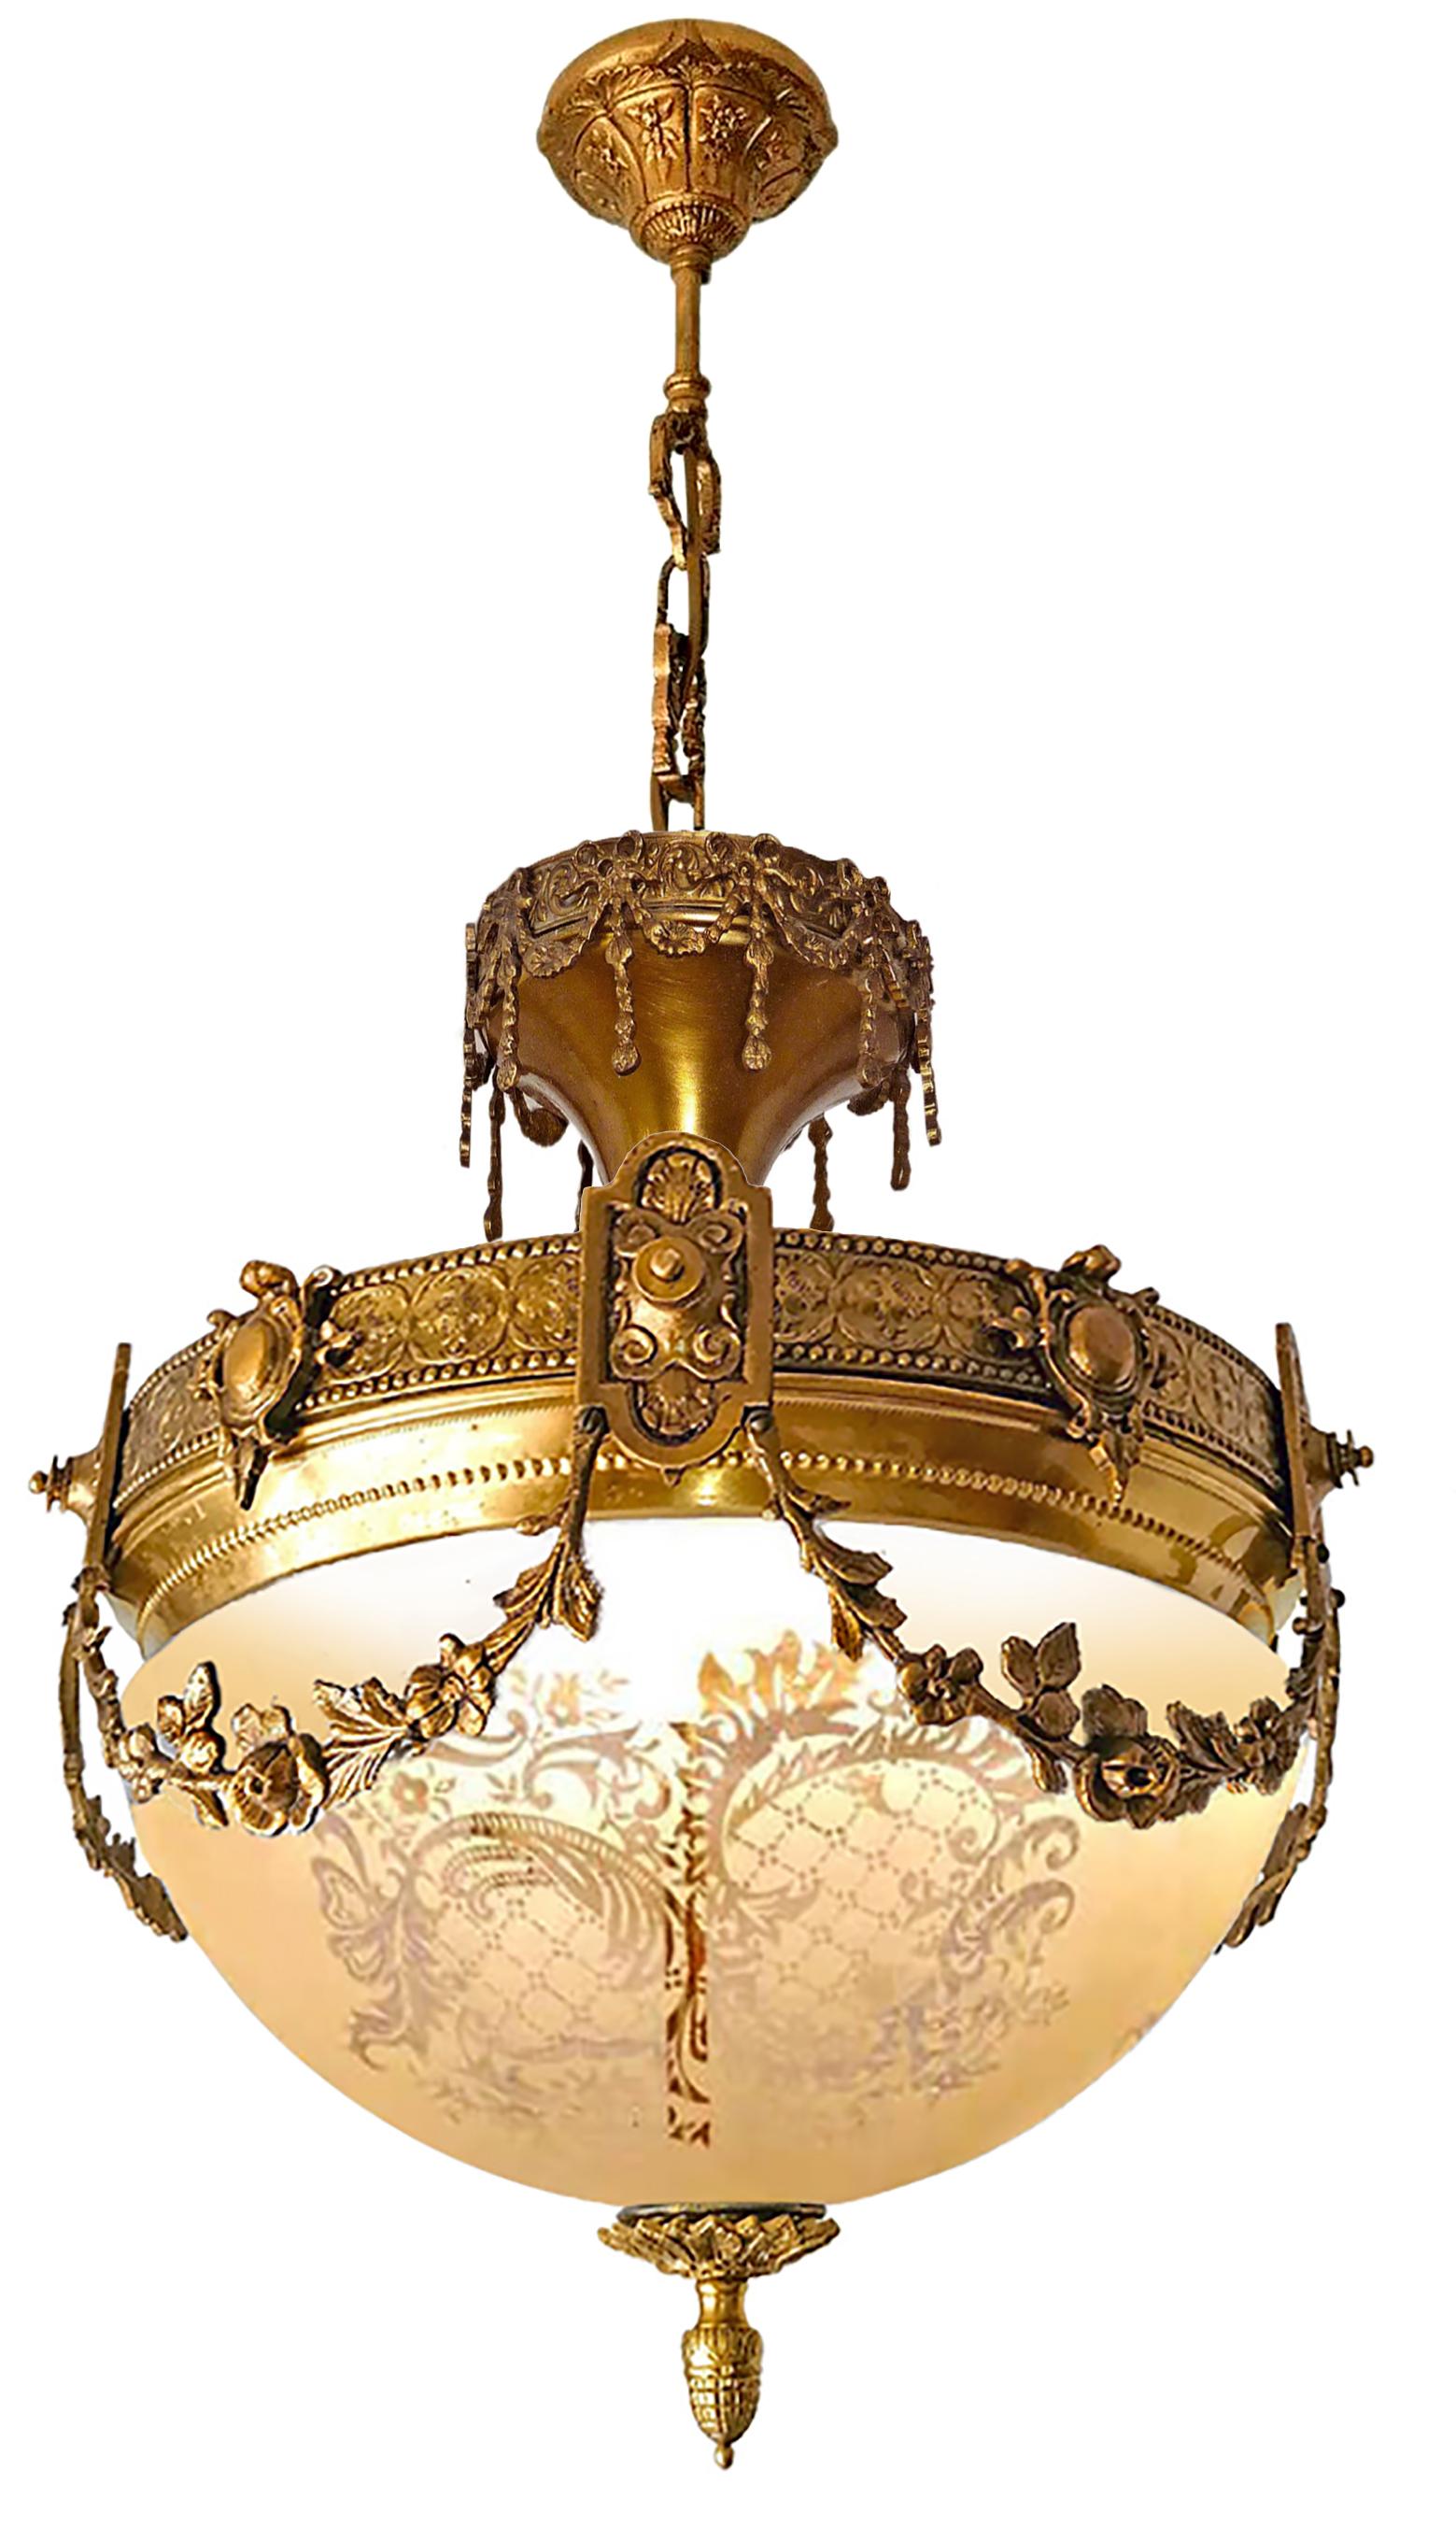 20th Century French Art Nouveau & Art Deco Chandelier, Gilt Bronze & Etched Glass Early 20th